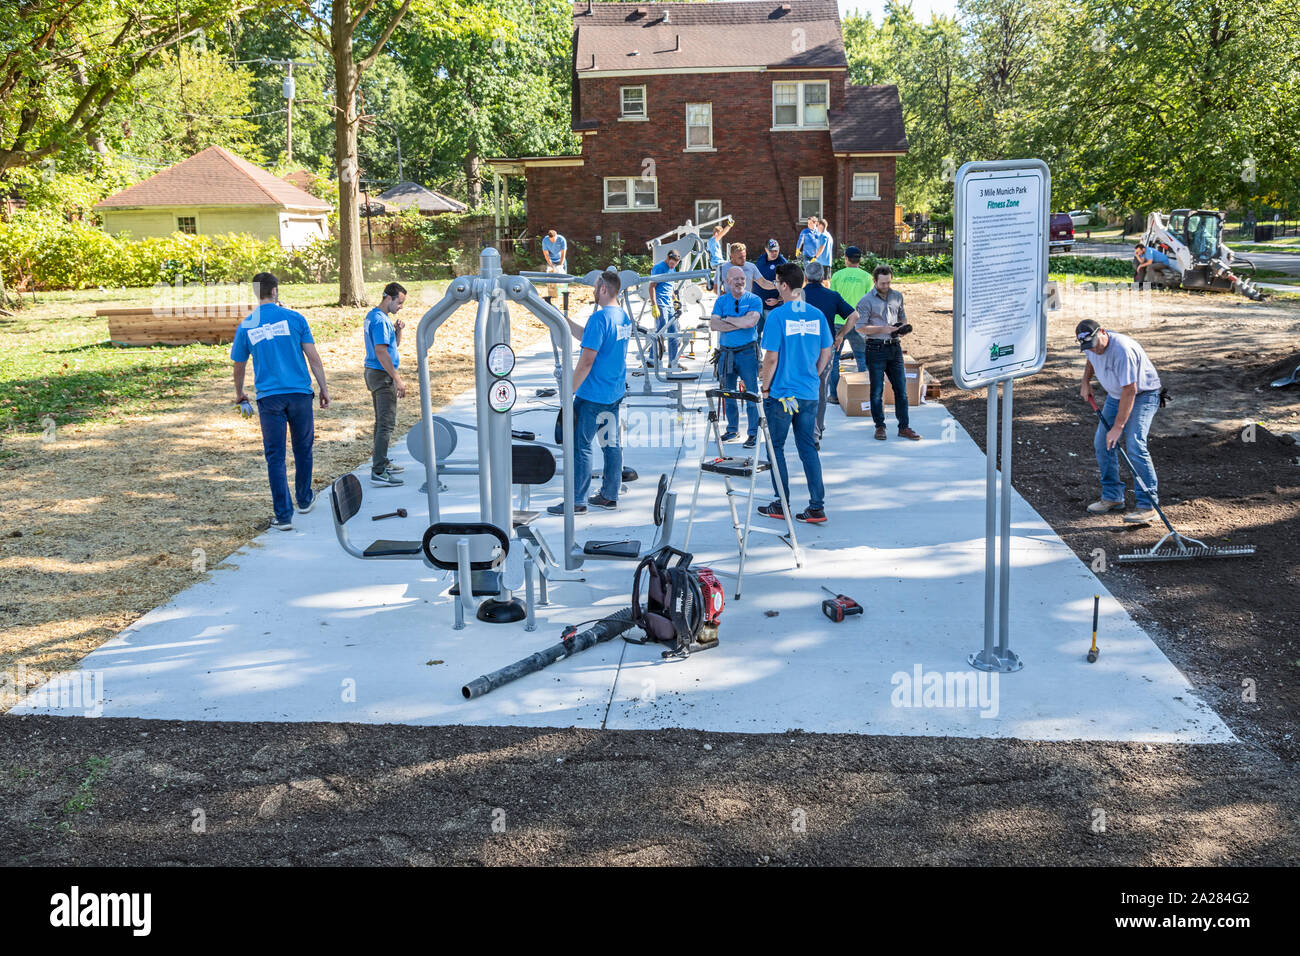 Detroit, Michigan - Volunteers from Cooper Standard install exercise equipment in a new community park in the Morningside neighborhood. Stock Photo